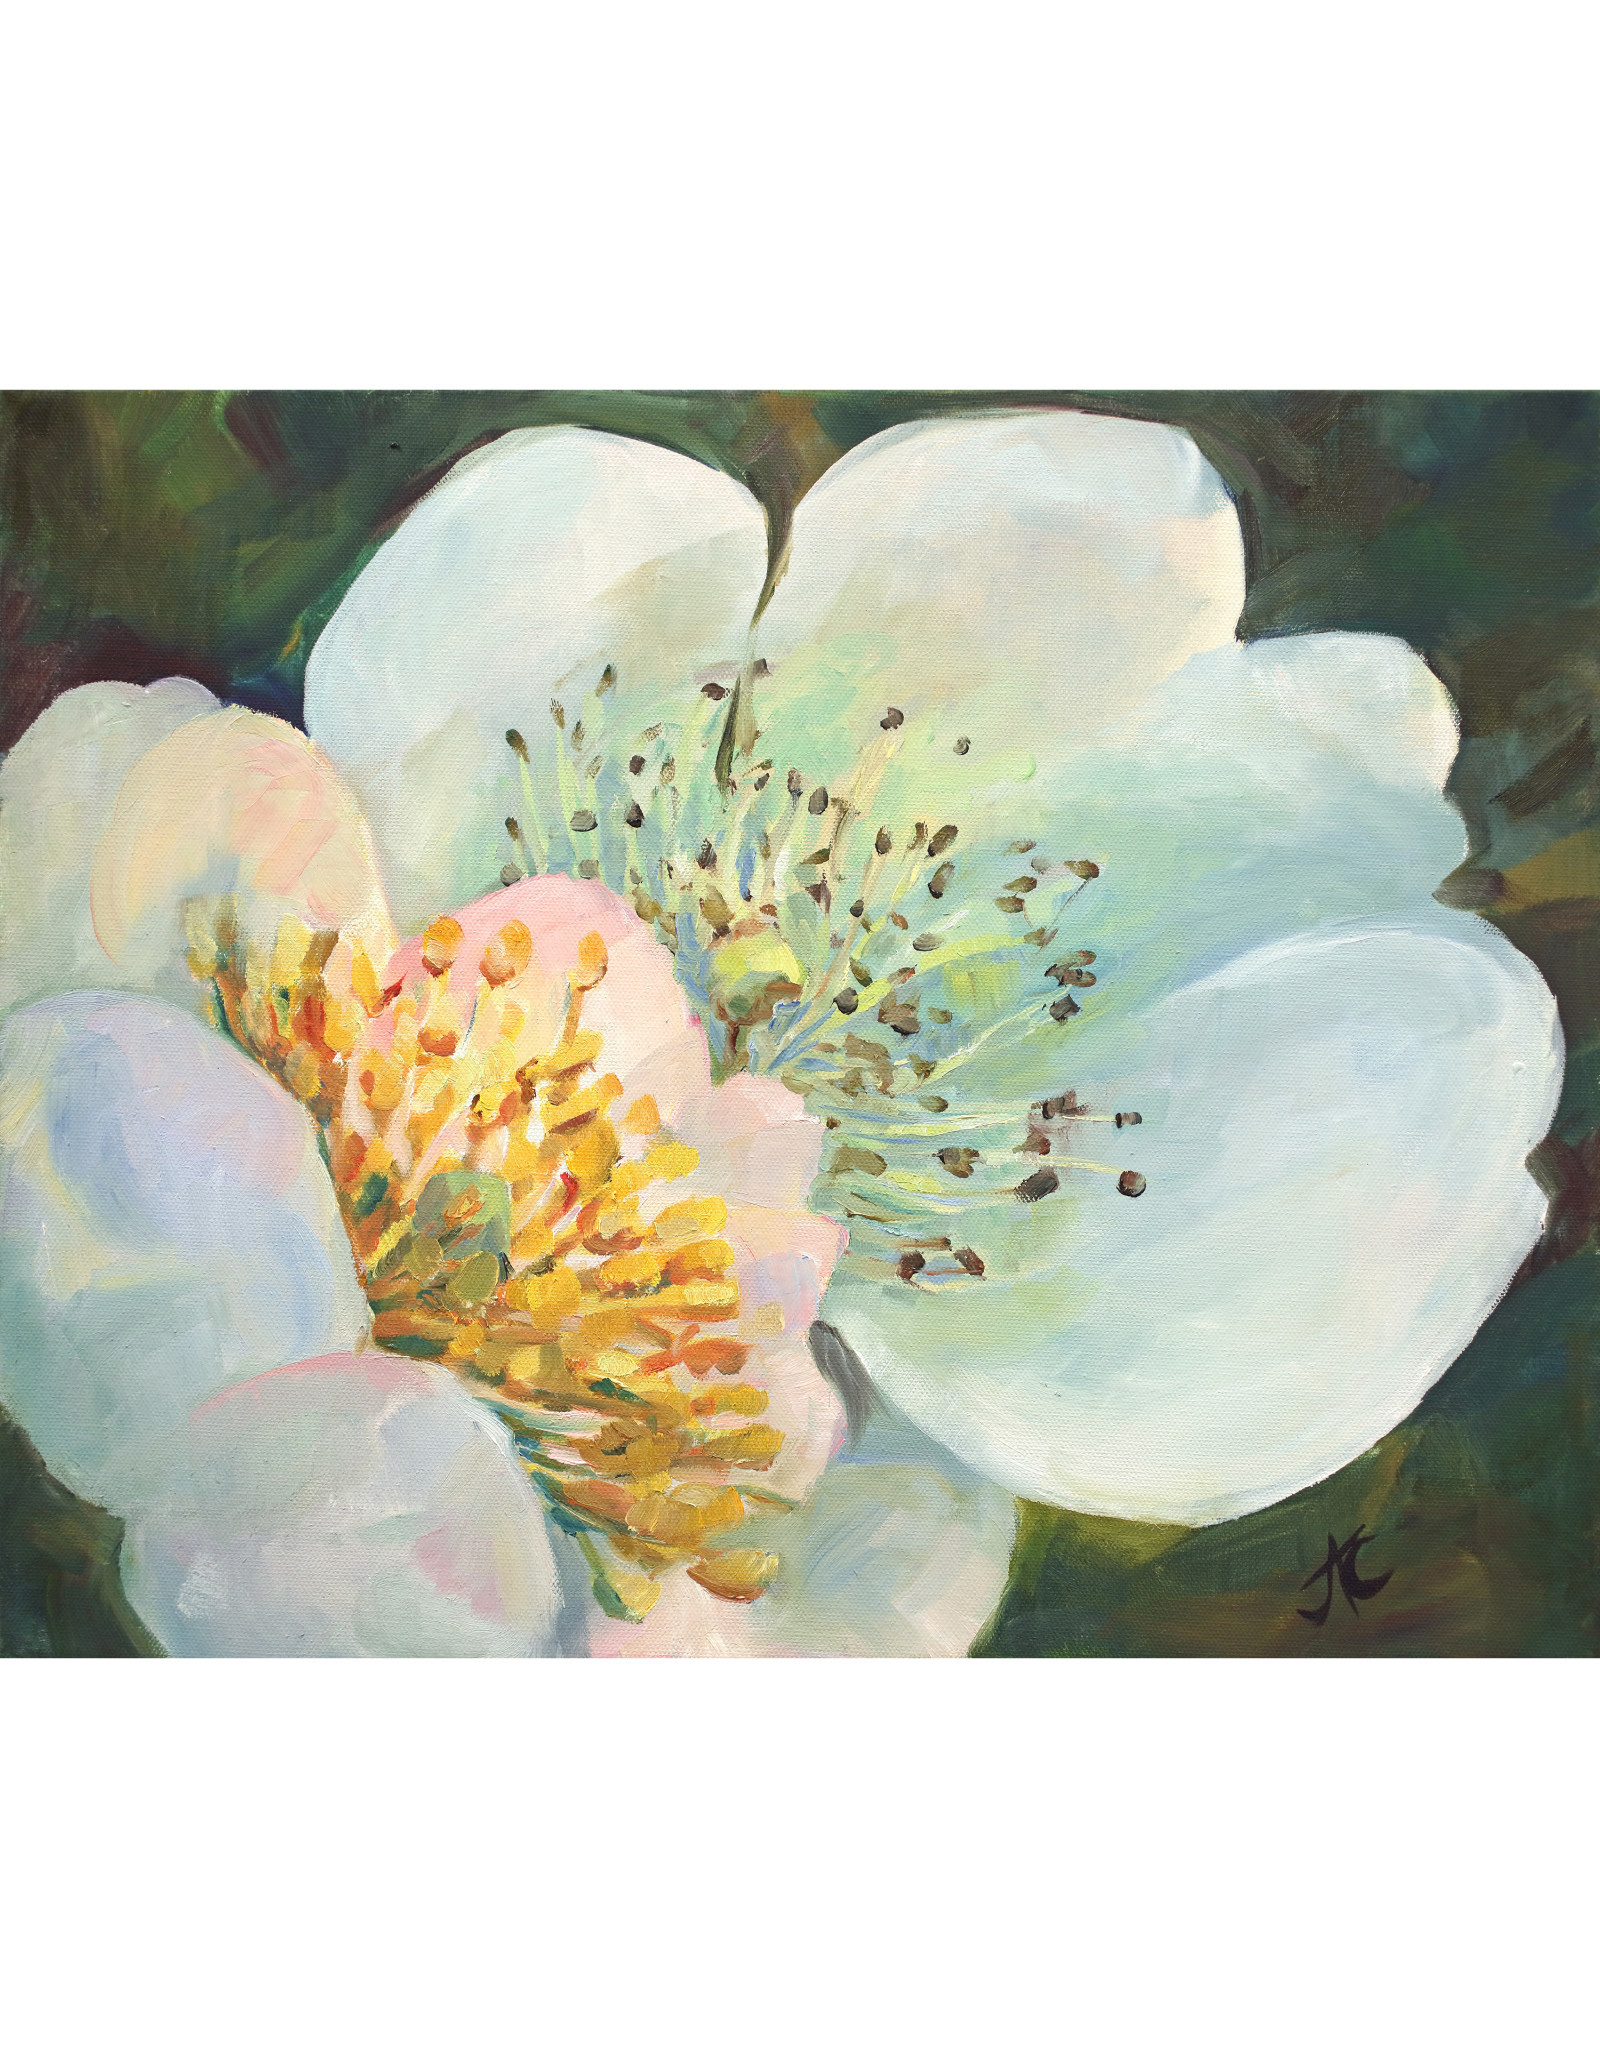 Jennifer Cook-Chrysos CD Artworks, "Pair of Blossoms", Oil on Canvas, 20 x 16